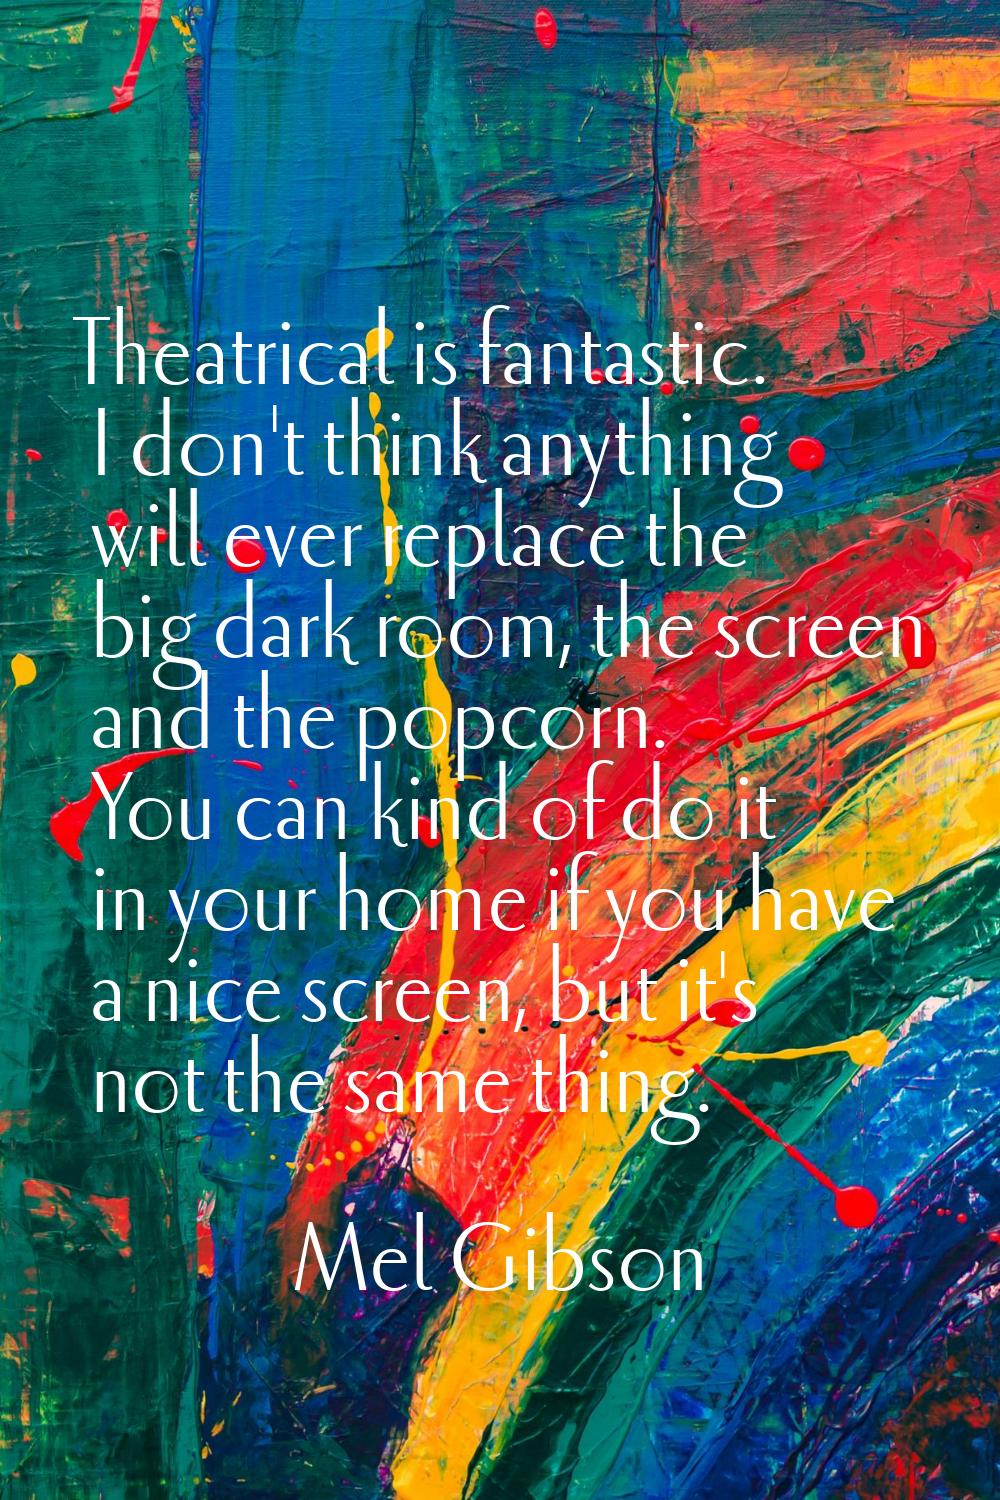 Theatrical is fantastic. I don't think anything will ever replace the big dark room, the screen and